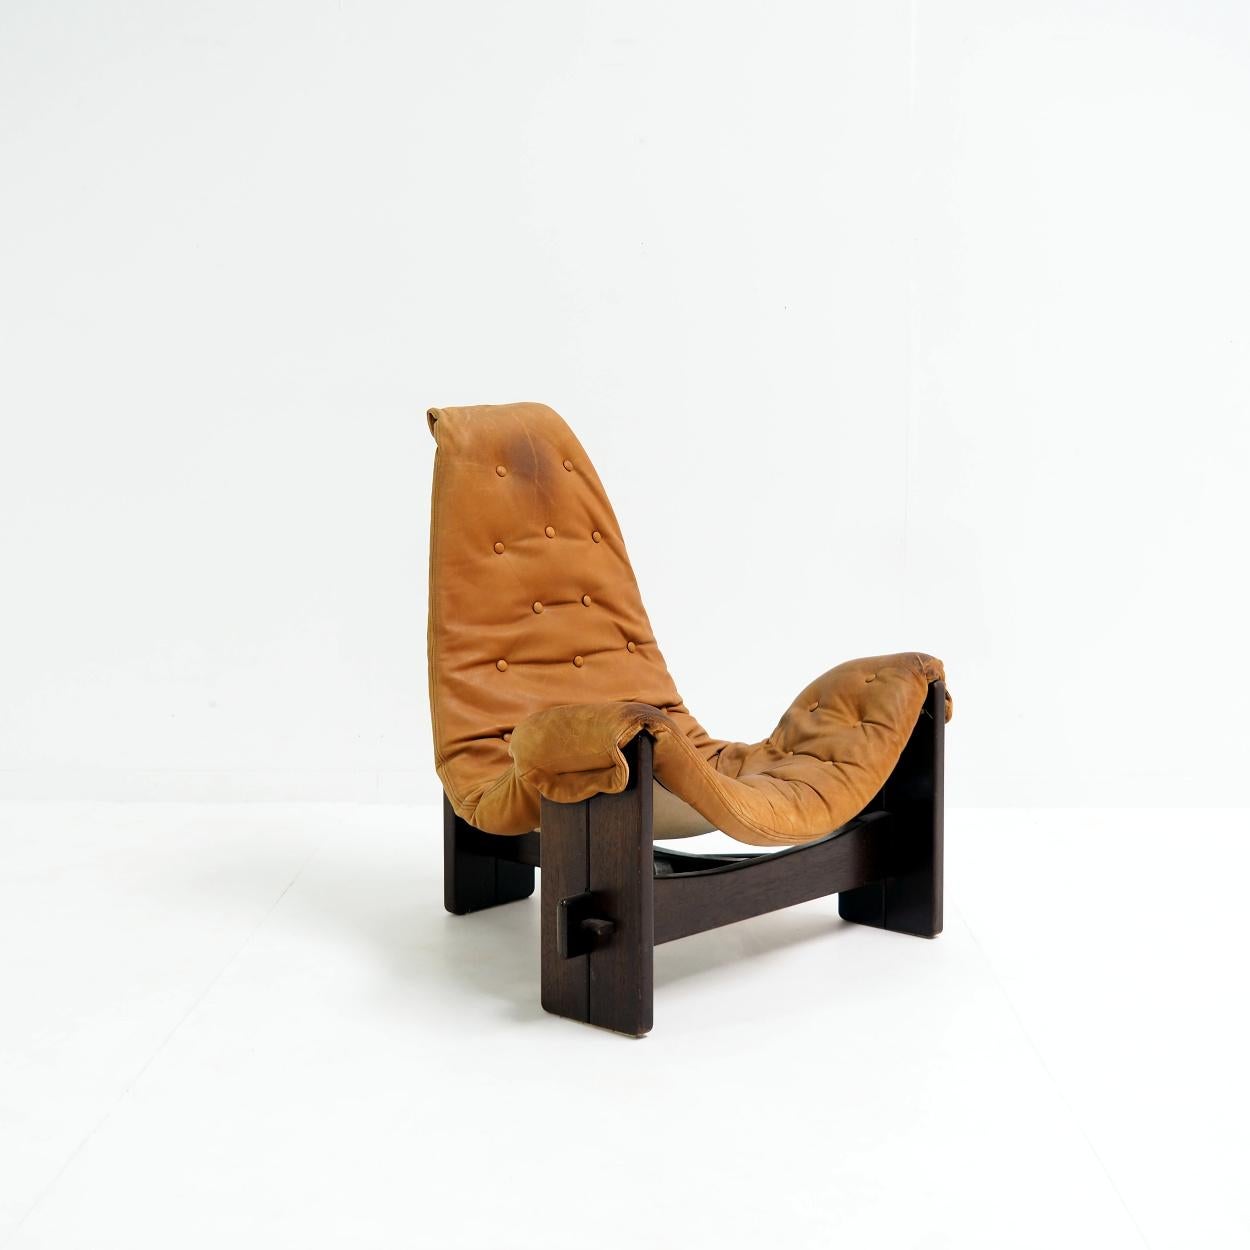 Very special lounge chair of Brazilian origin.

This chair, with its brutalist and beautiful jungle look, is handmade using only natural materials and earthy colors. No screws used. The canvas and leather is attached to the base with pins and can